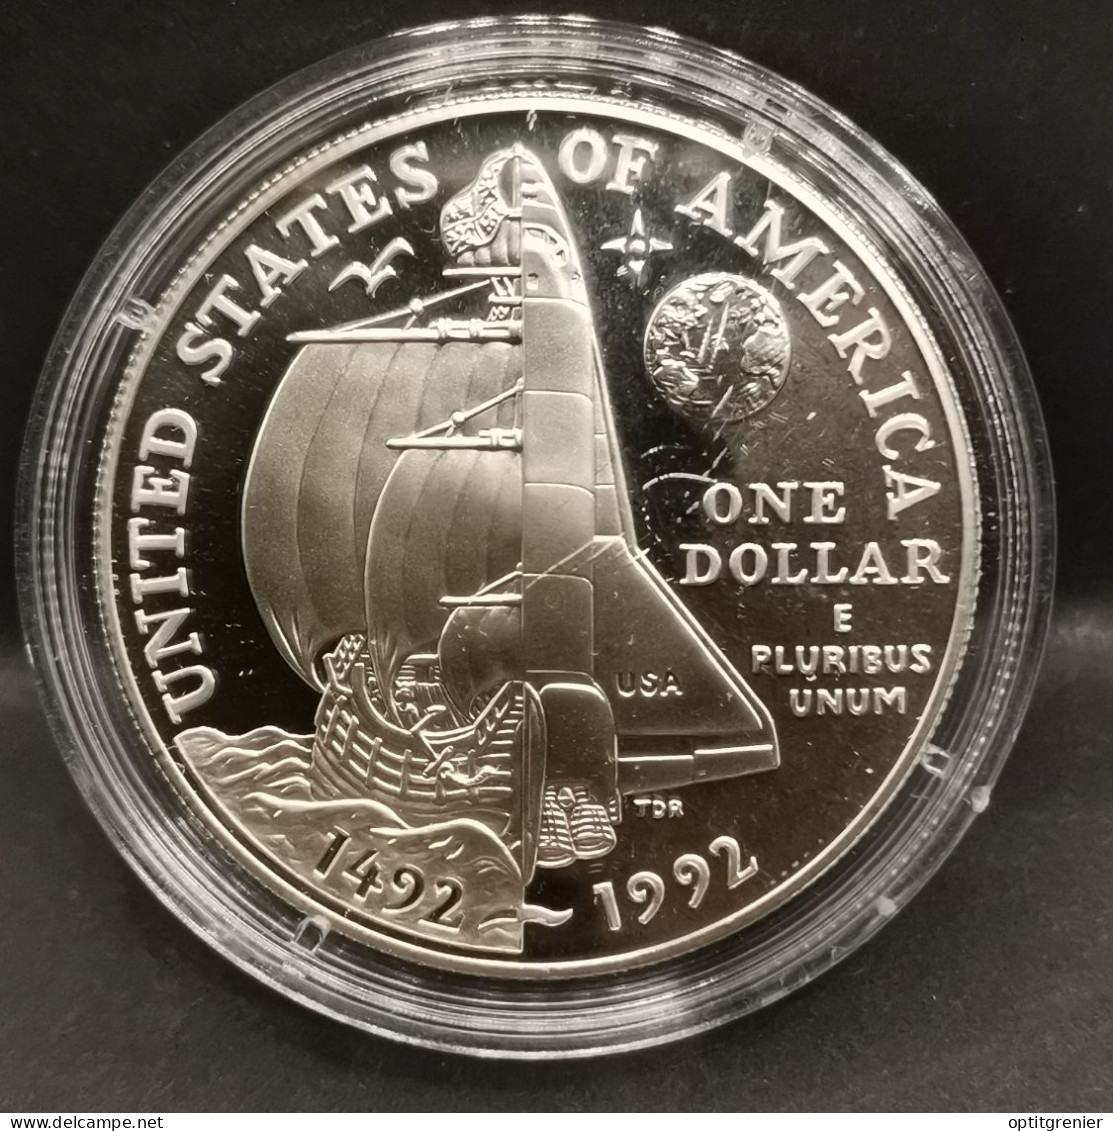 1 DOLLAR BE ARGENT 1992 P CHRISTOPHE COLOMB USA / PROOF SILVER - Sin Clasificación